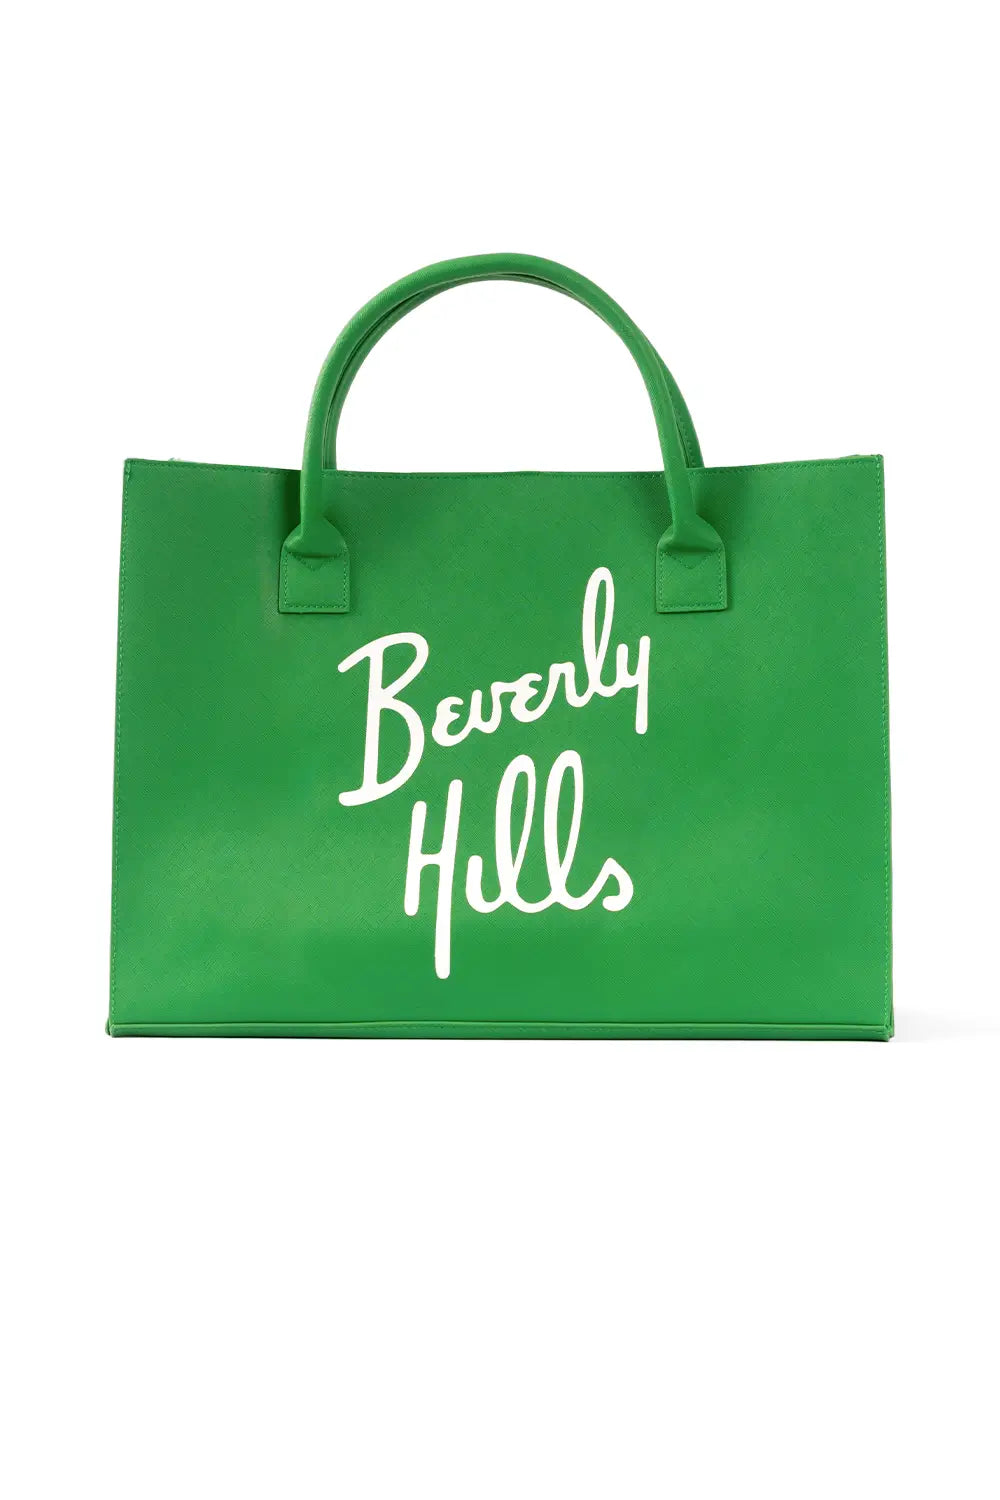 Beverly Hill Tote